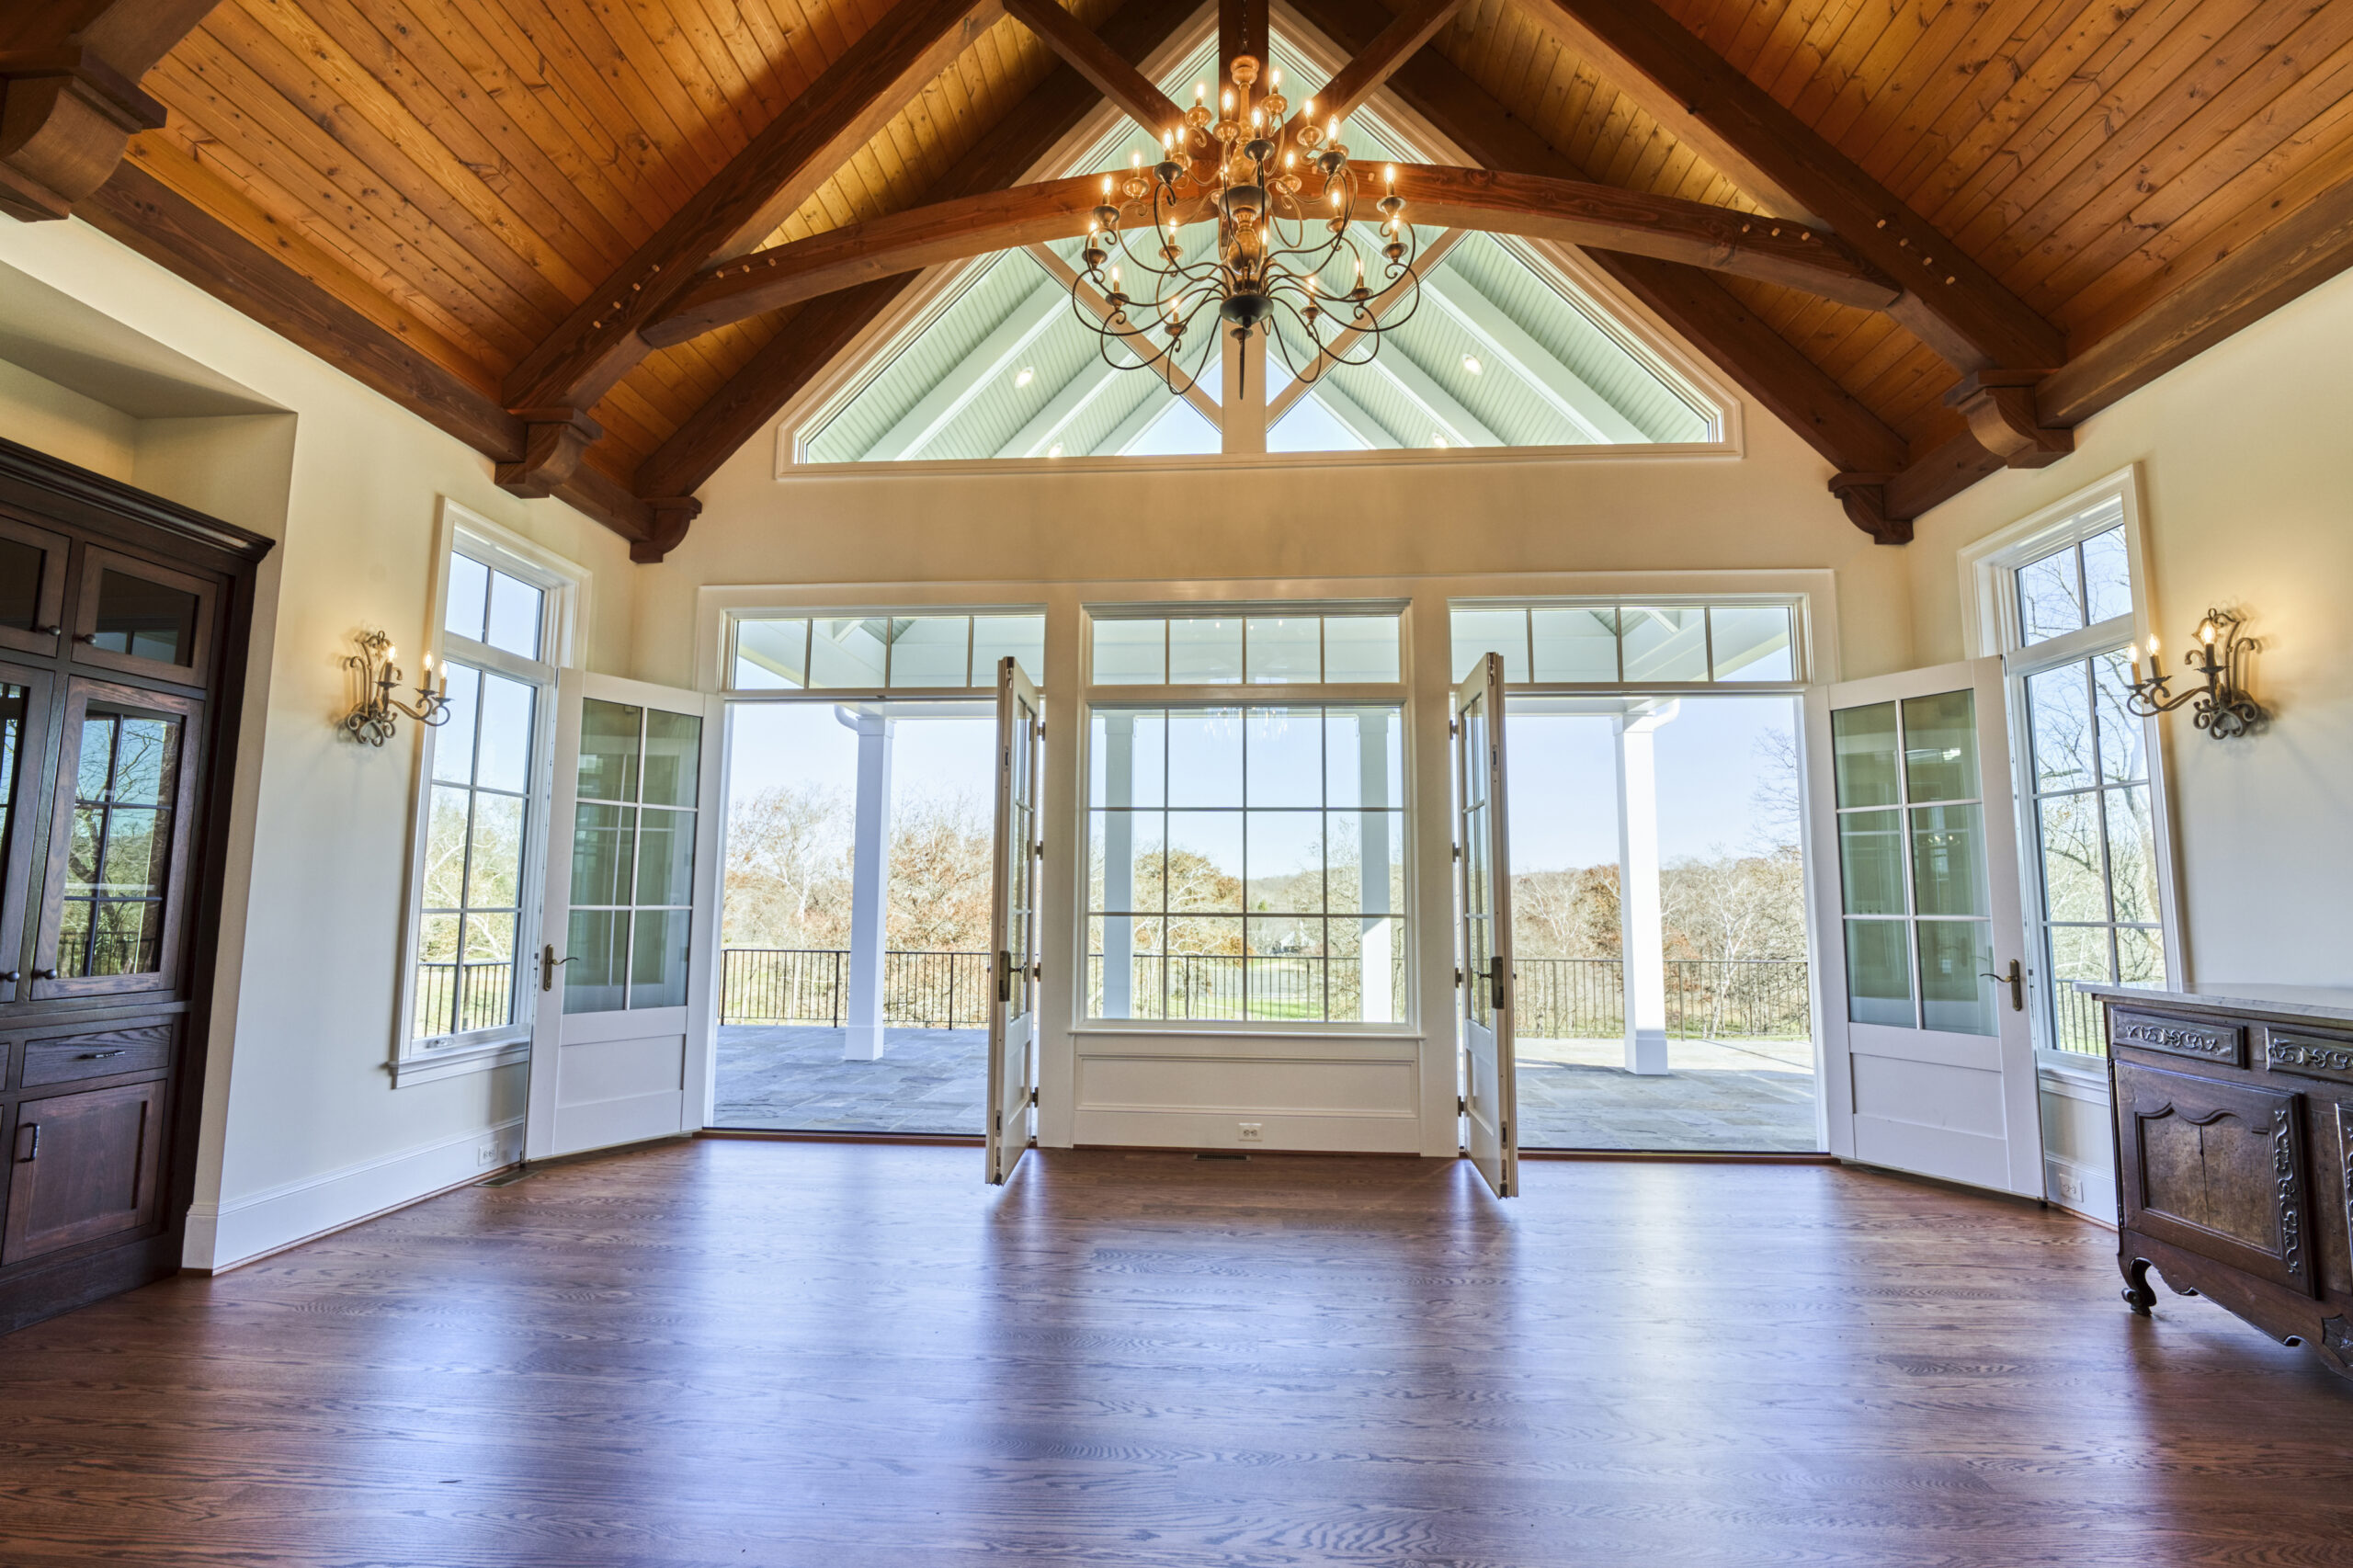 Professional interior photo of custom build new home by Black Oak Construction - showing the great room with hardwood floors, vaulted wooden ceiling with wooden trusses, 2 sets of double doors leading out to the rear covered patio